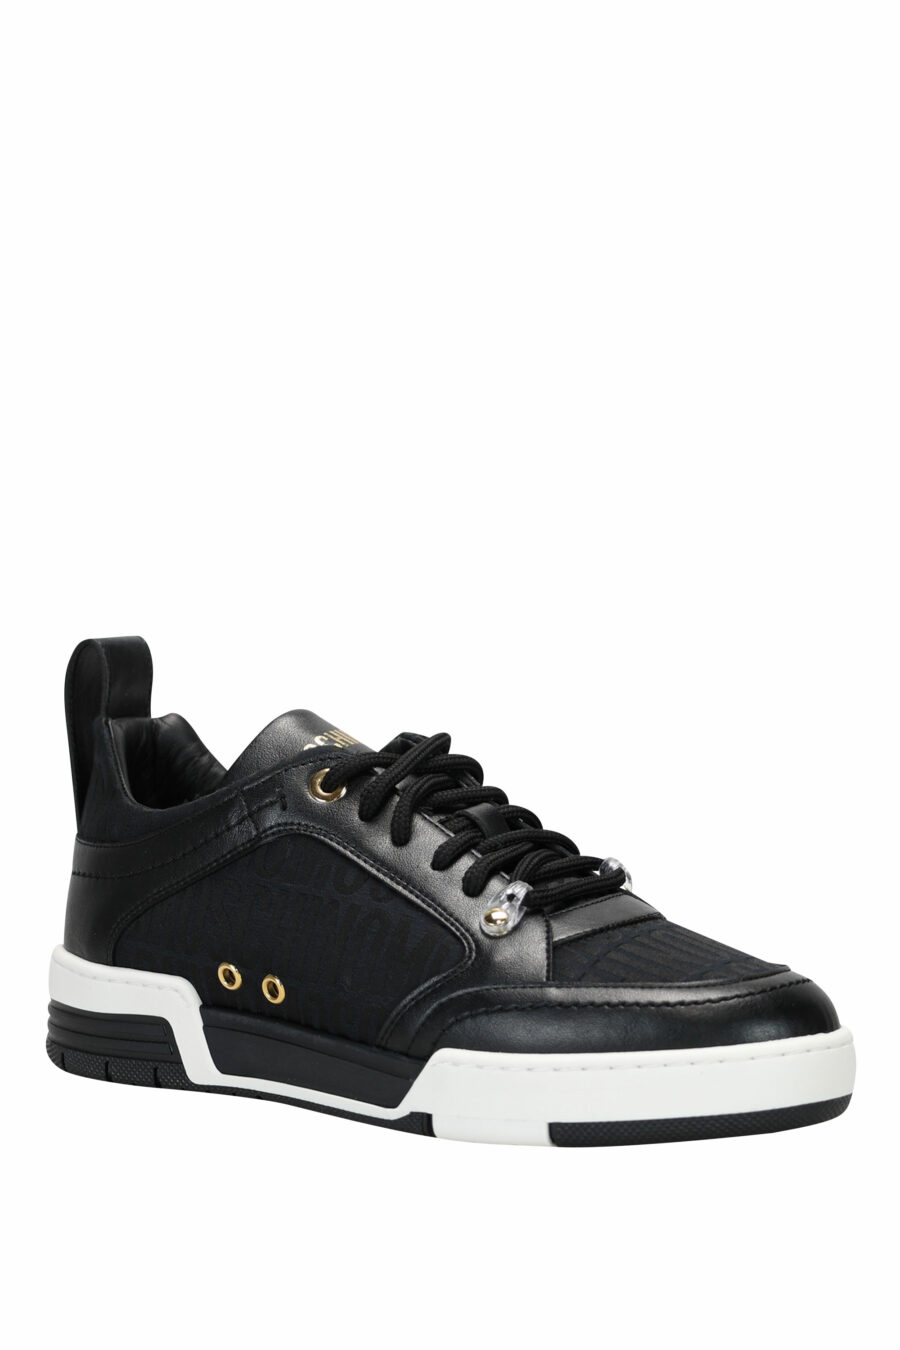 Black leather trainers with "all over logo" and white sole - 8054653835405 1